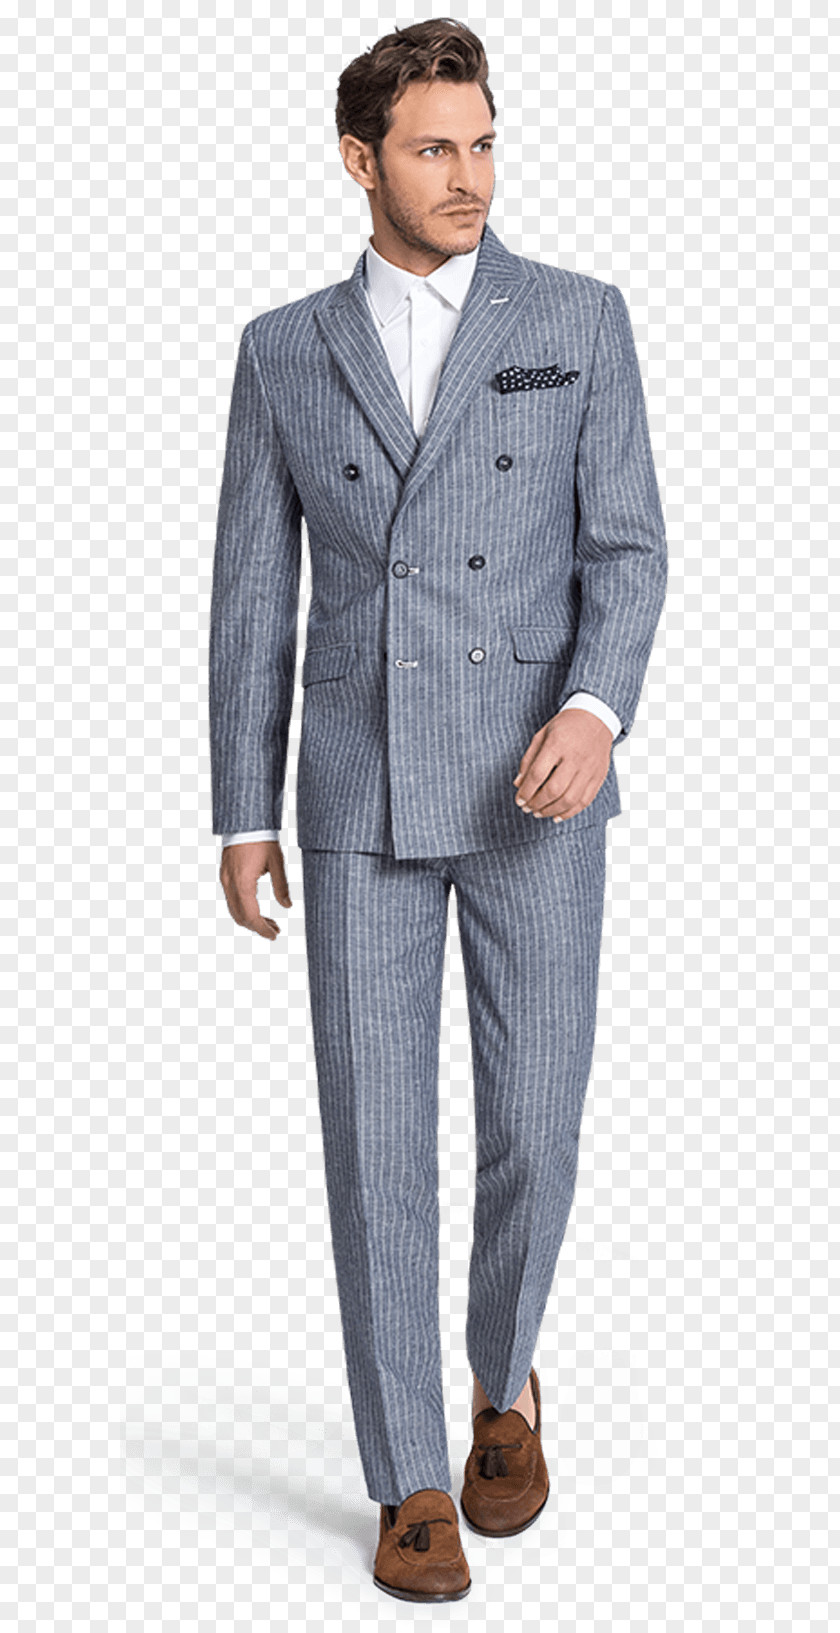 Suit John Bosley Charlie's Angels Double-breasted Dress PNG